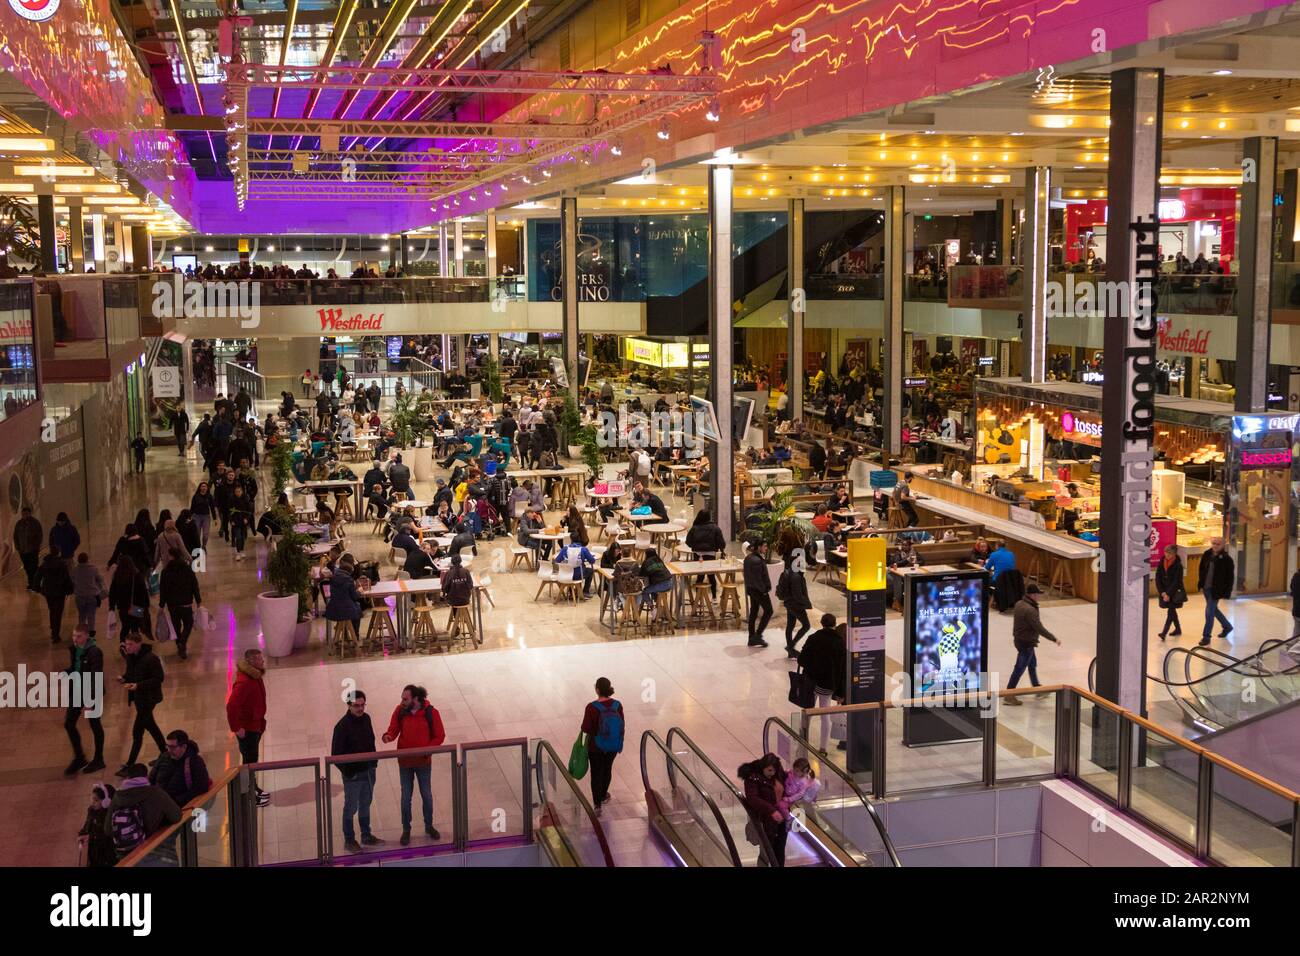 The food court - Picture of Westfield London - Tripadvisor